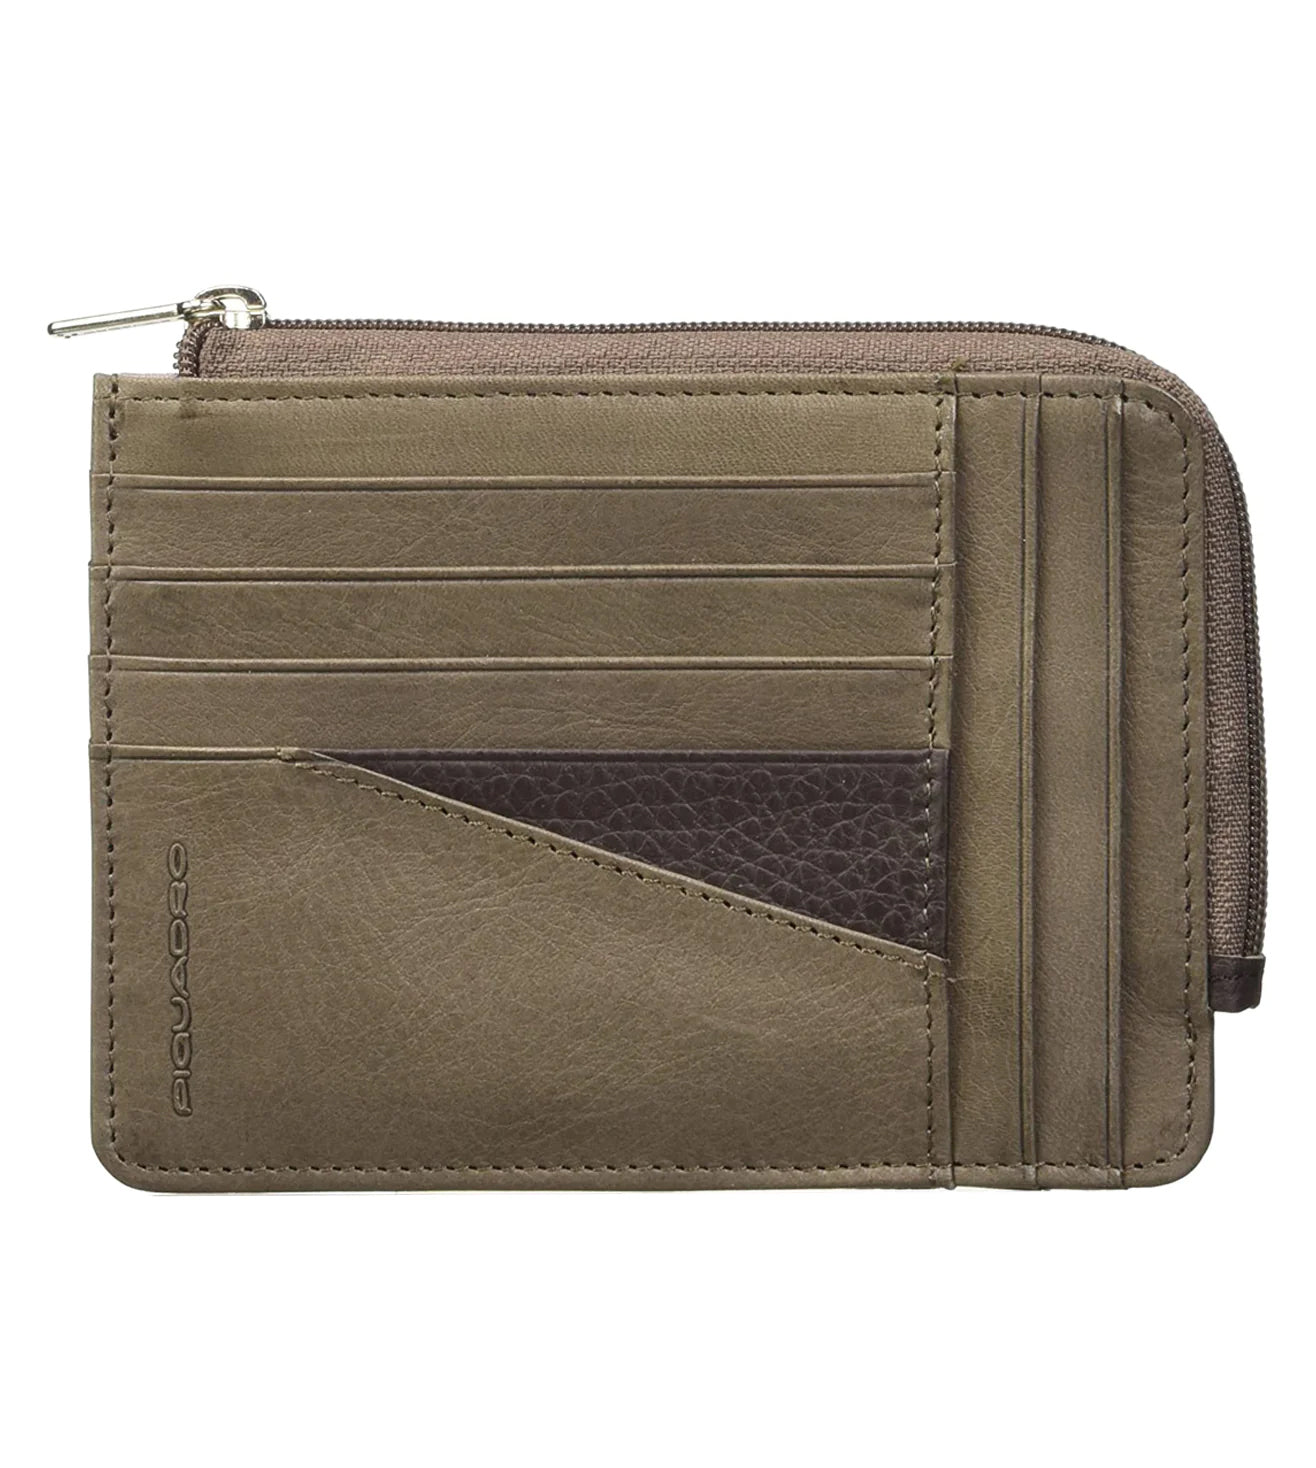 Piquadro Cary Men's Taupe Wallet